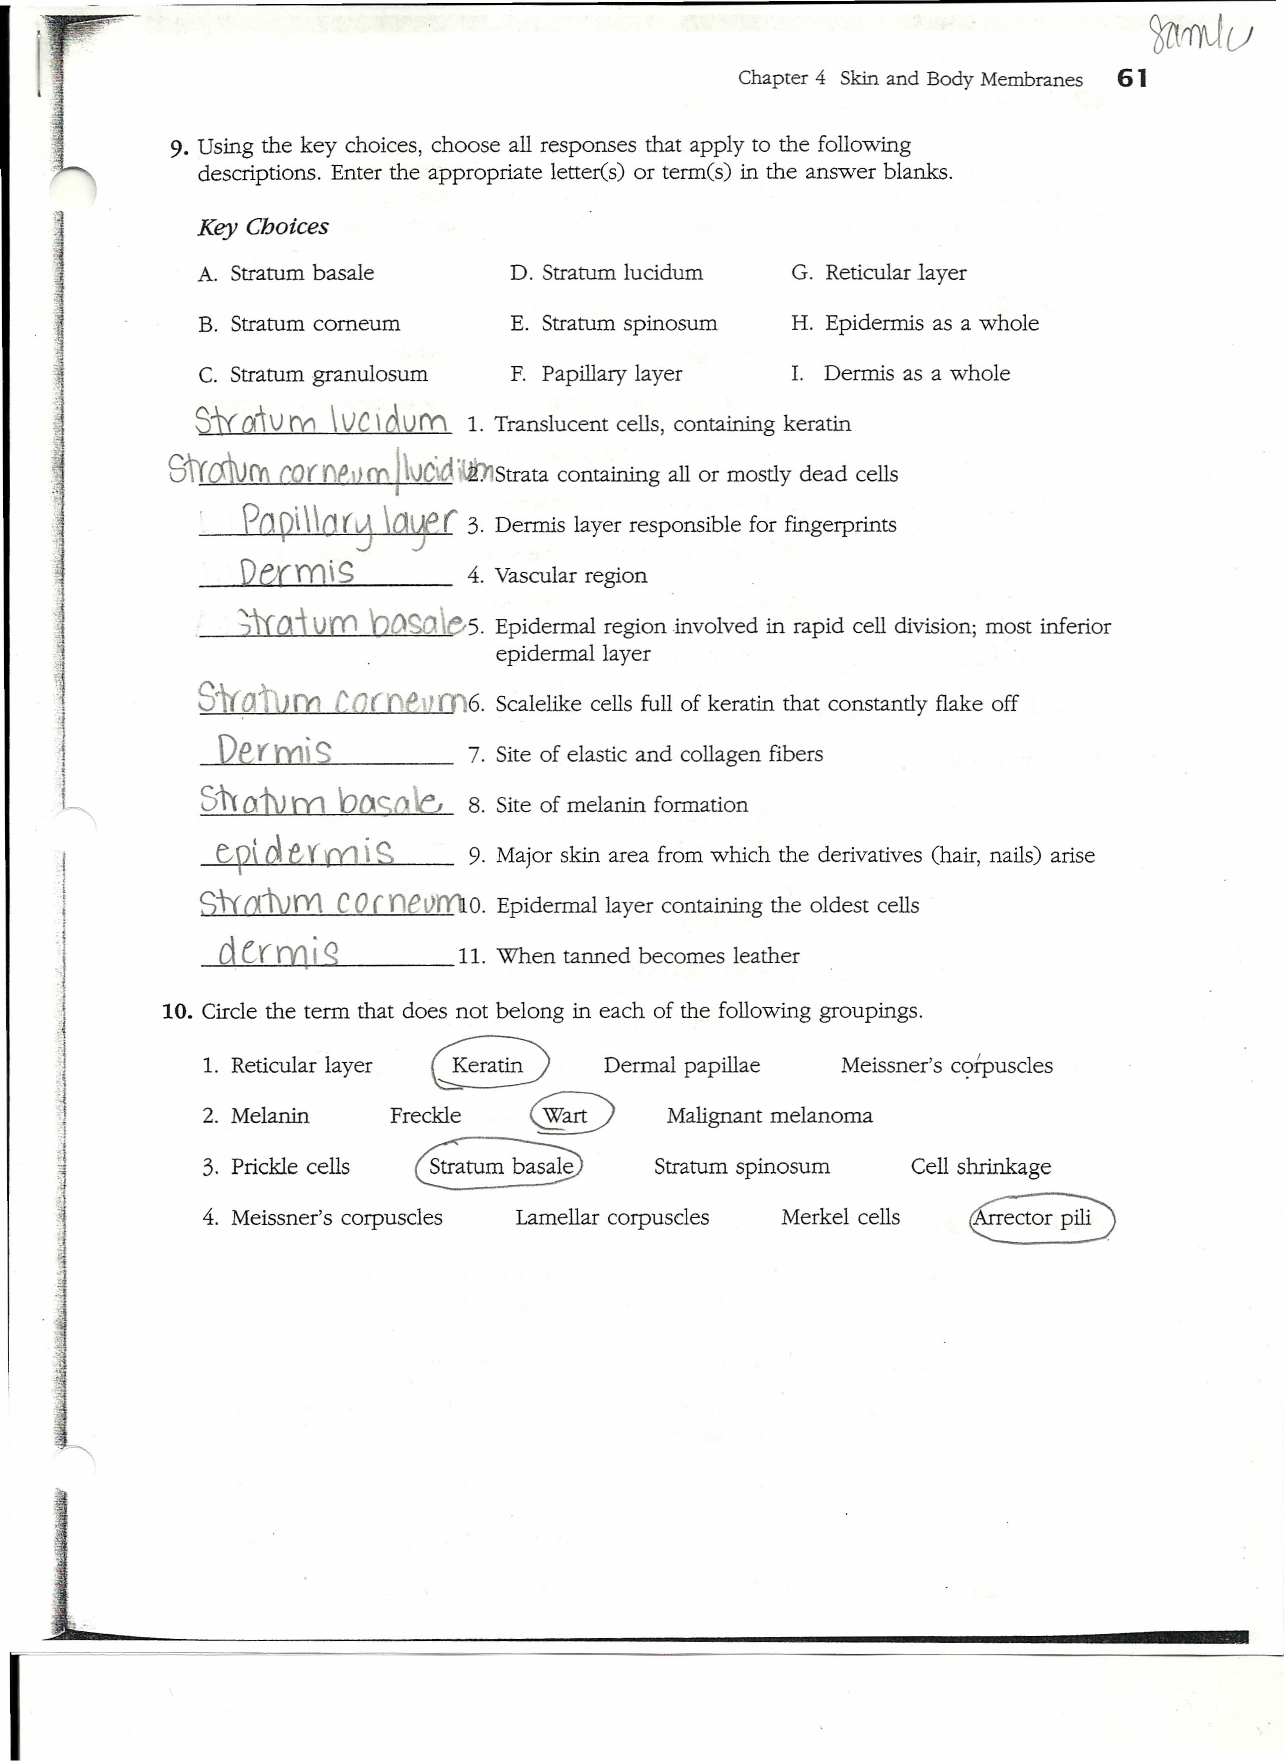 anatomy-and-physiology-coloring-workbook-answer-key-chapter-4